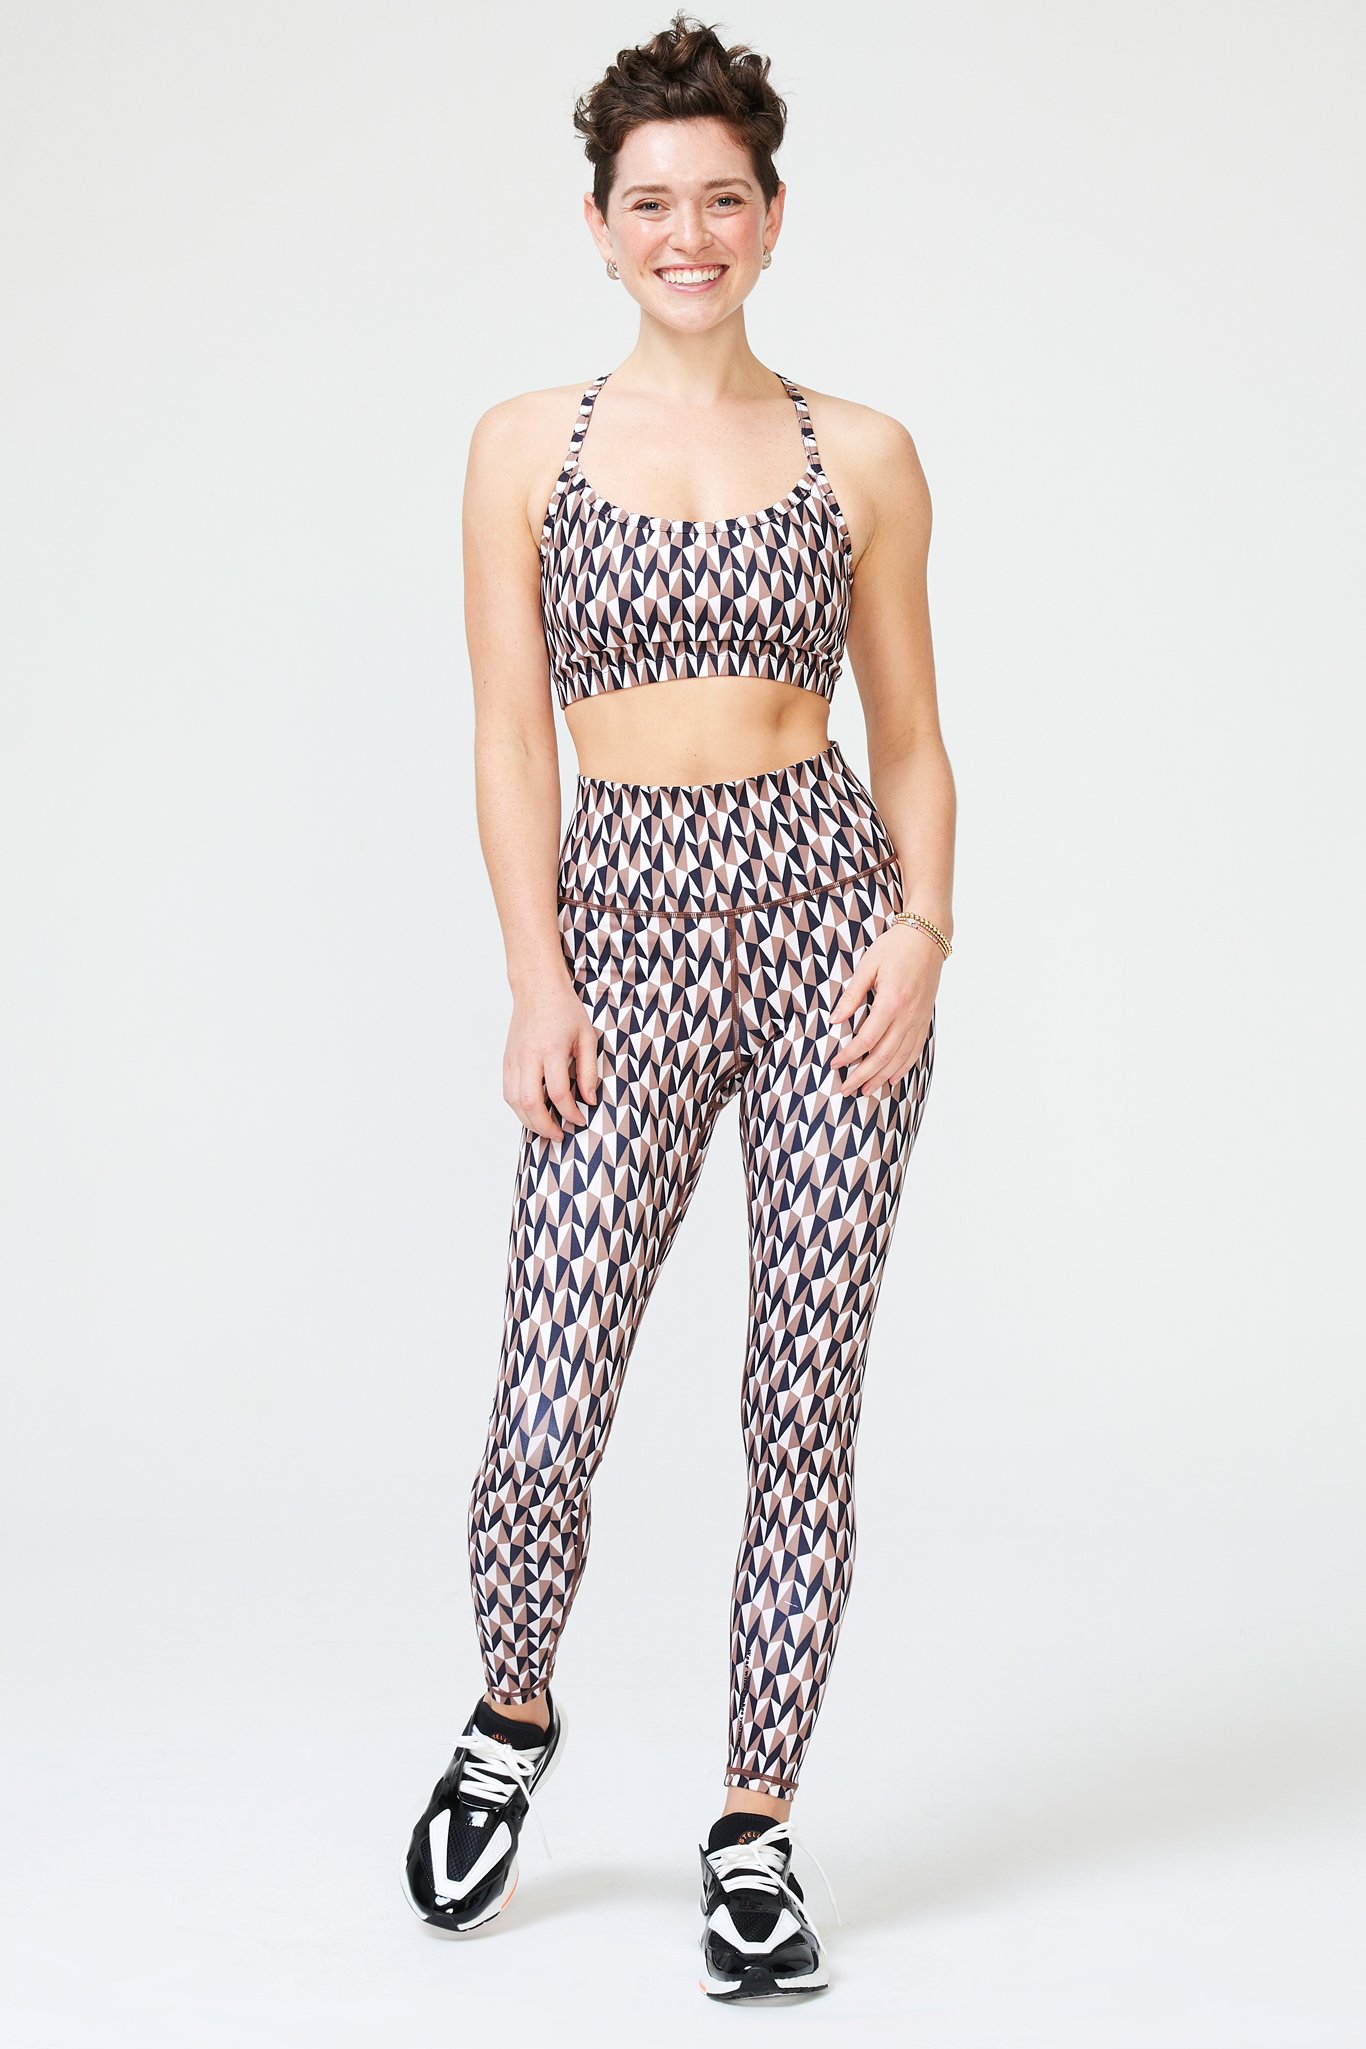 Two Tone TLC Leggings in Aztec and Camel